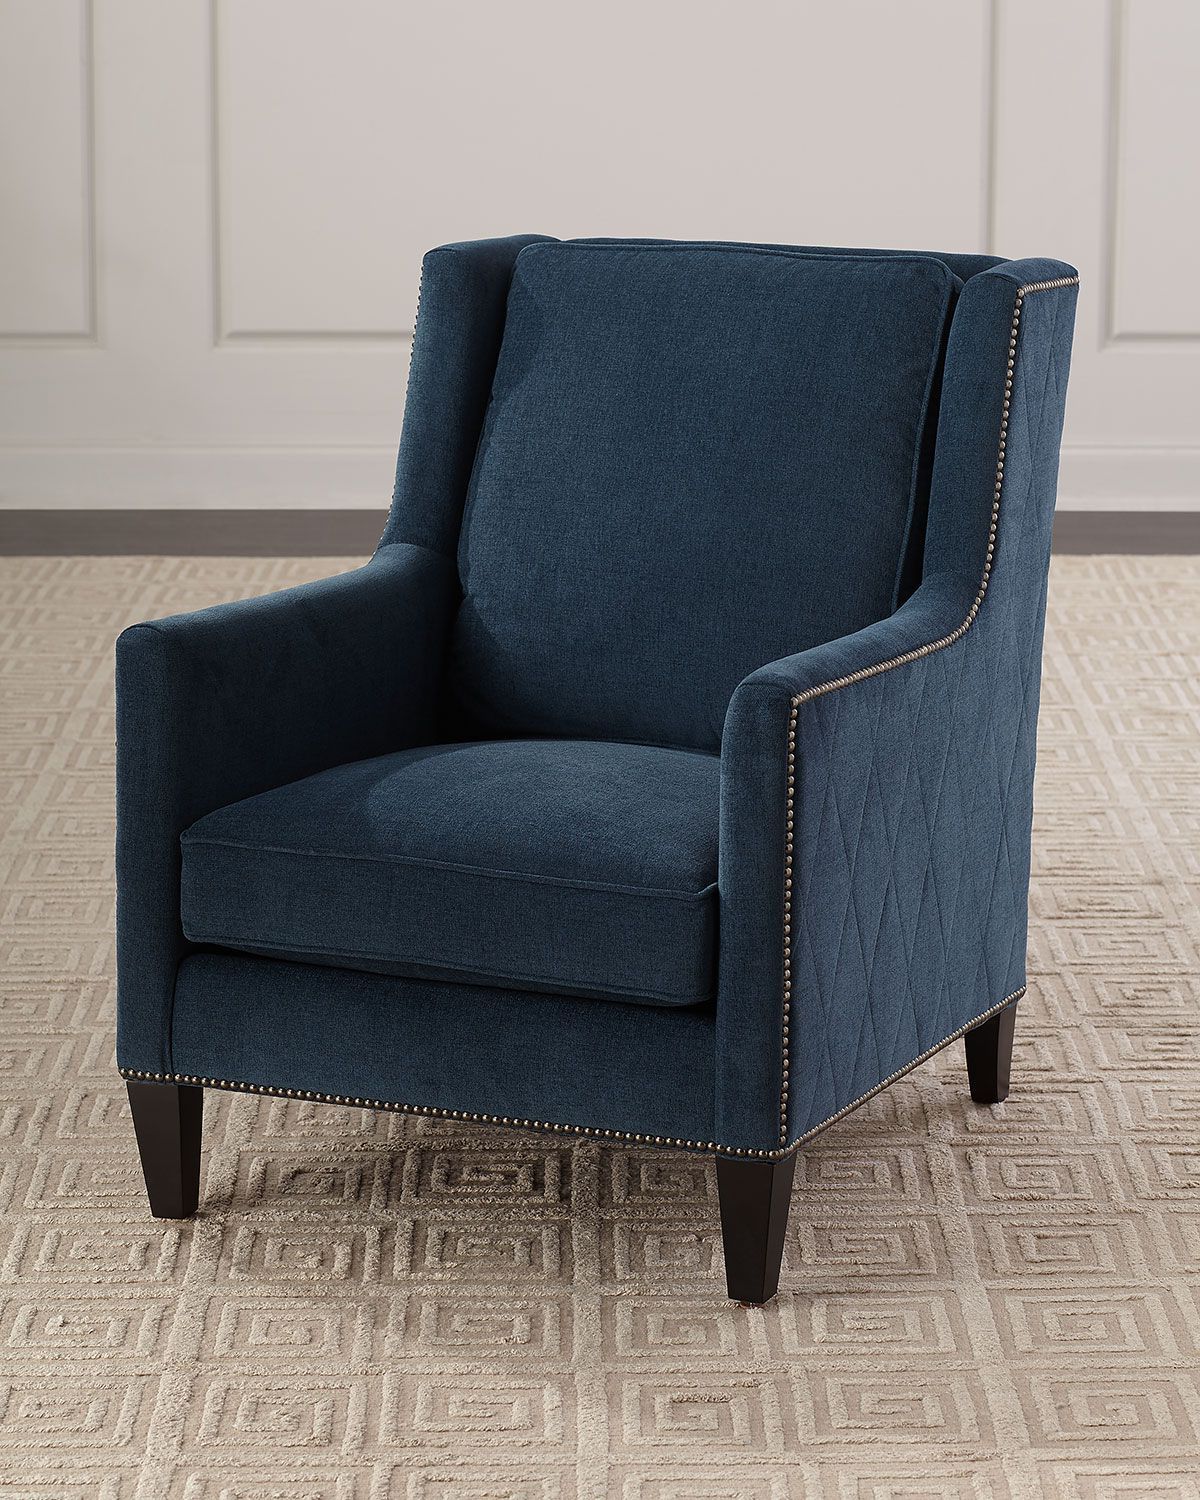 Most Up To Date Almada Armchairs Intended For Bernhardt Almada Chair In  (View 10 of 20)